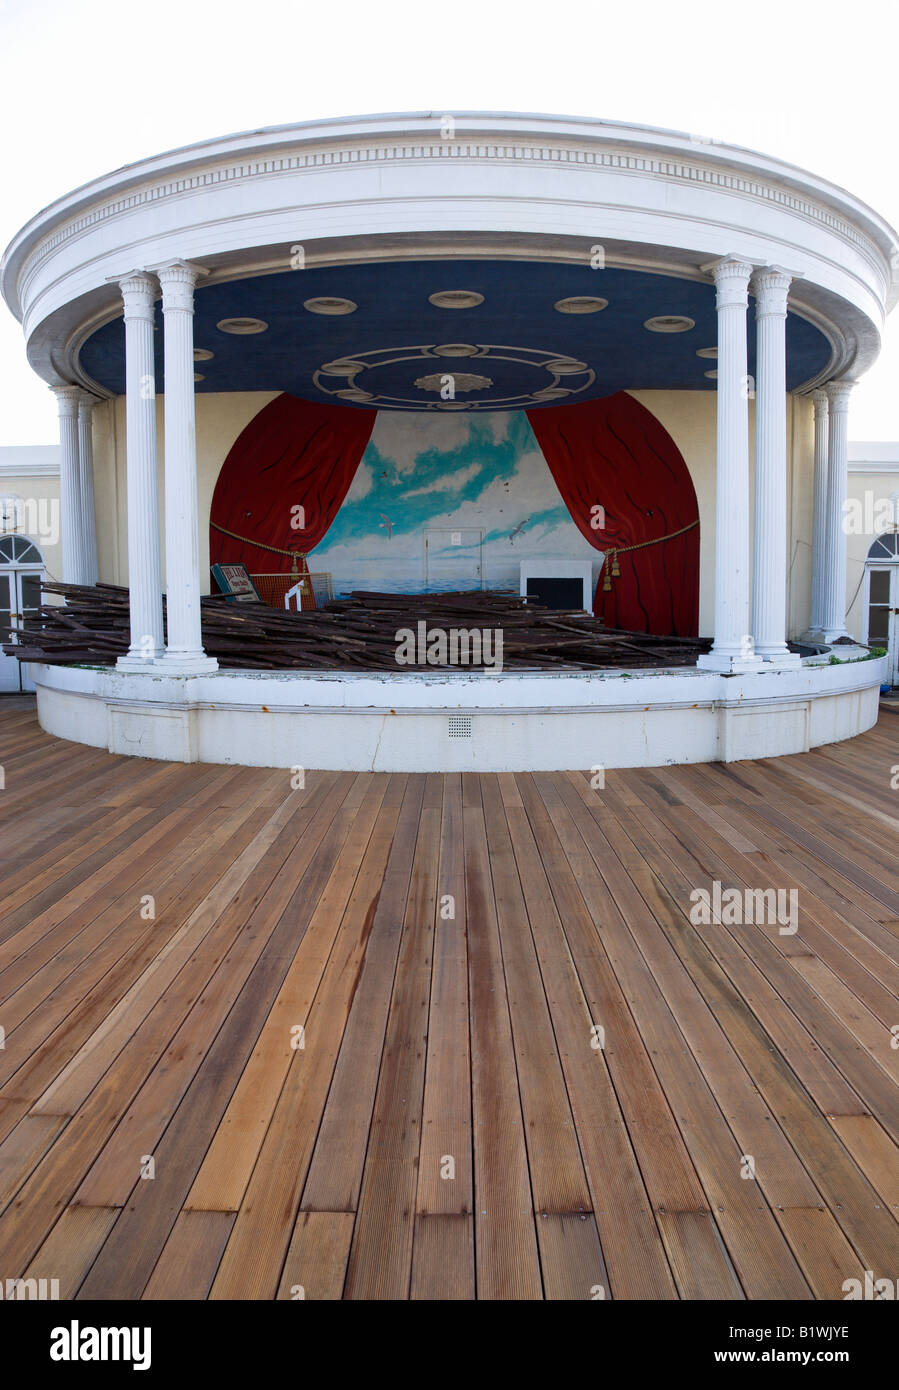 ENGLAND West Sussex Worthing Bandstand with old decking on stage day timber from ship sunk in English Channel washed onto beach Stock Photo